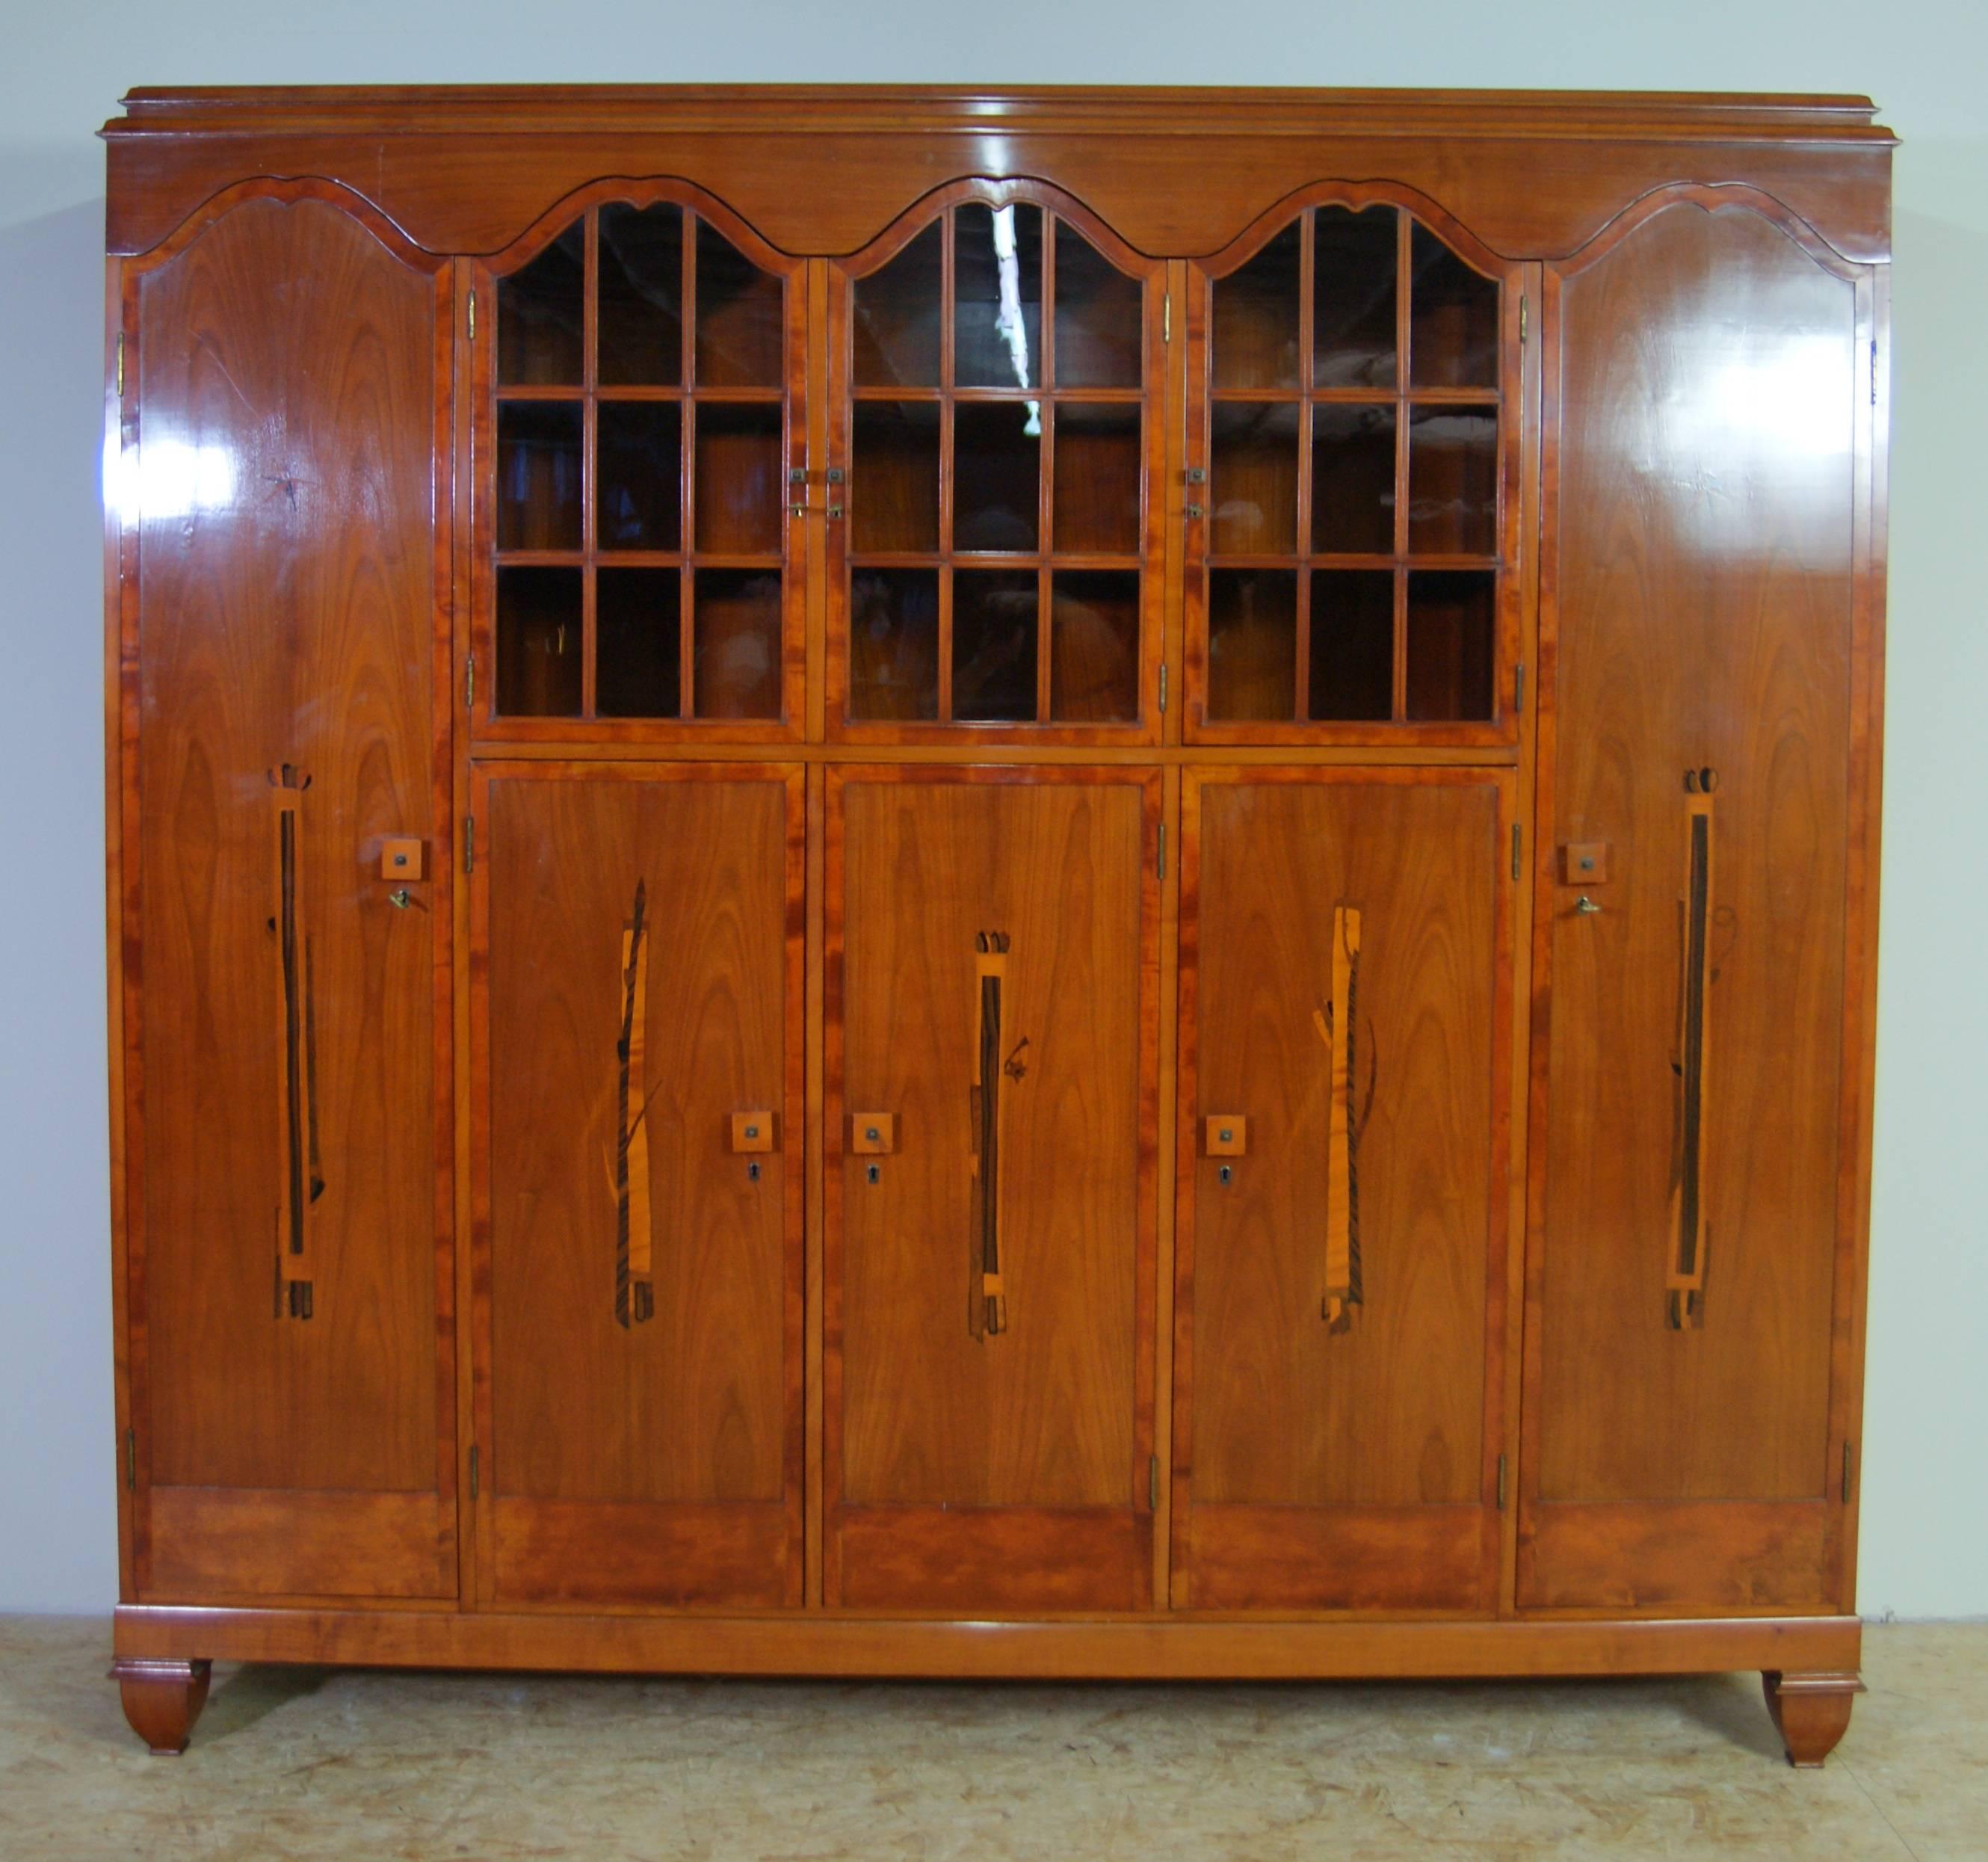 A dining room set from the Art Nouveau era by Richard Riemerschmid. It consists of a great display case, sideboard, commode, mirror and a table with six chairs of which all parts can be seen above. Every part is held in a brown-red birch veneer,